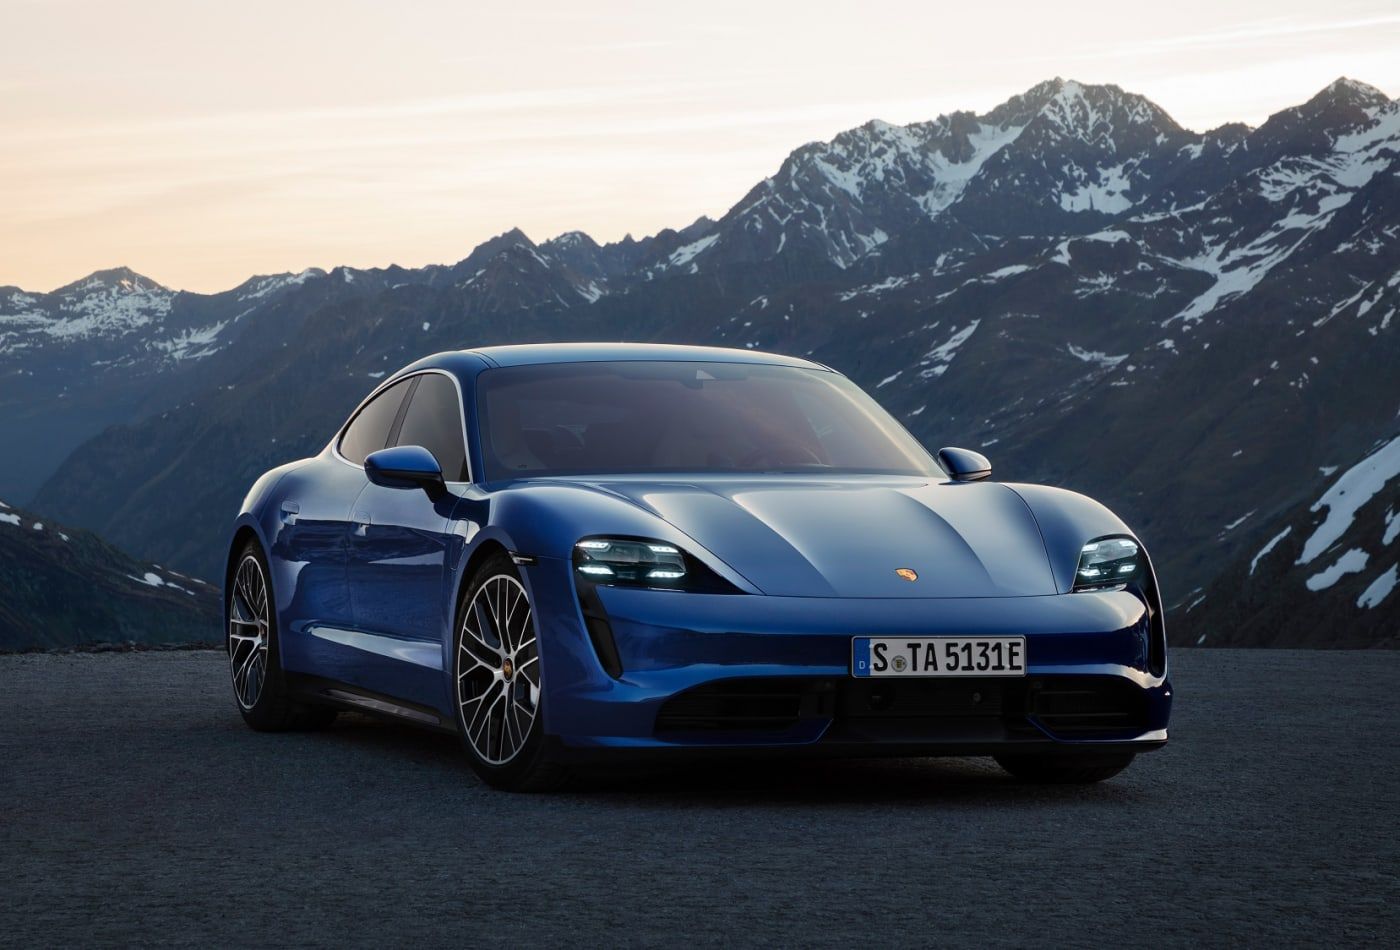 Blue luxury electric vehicle with mountains